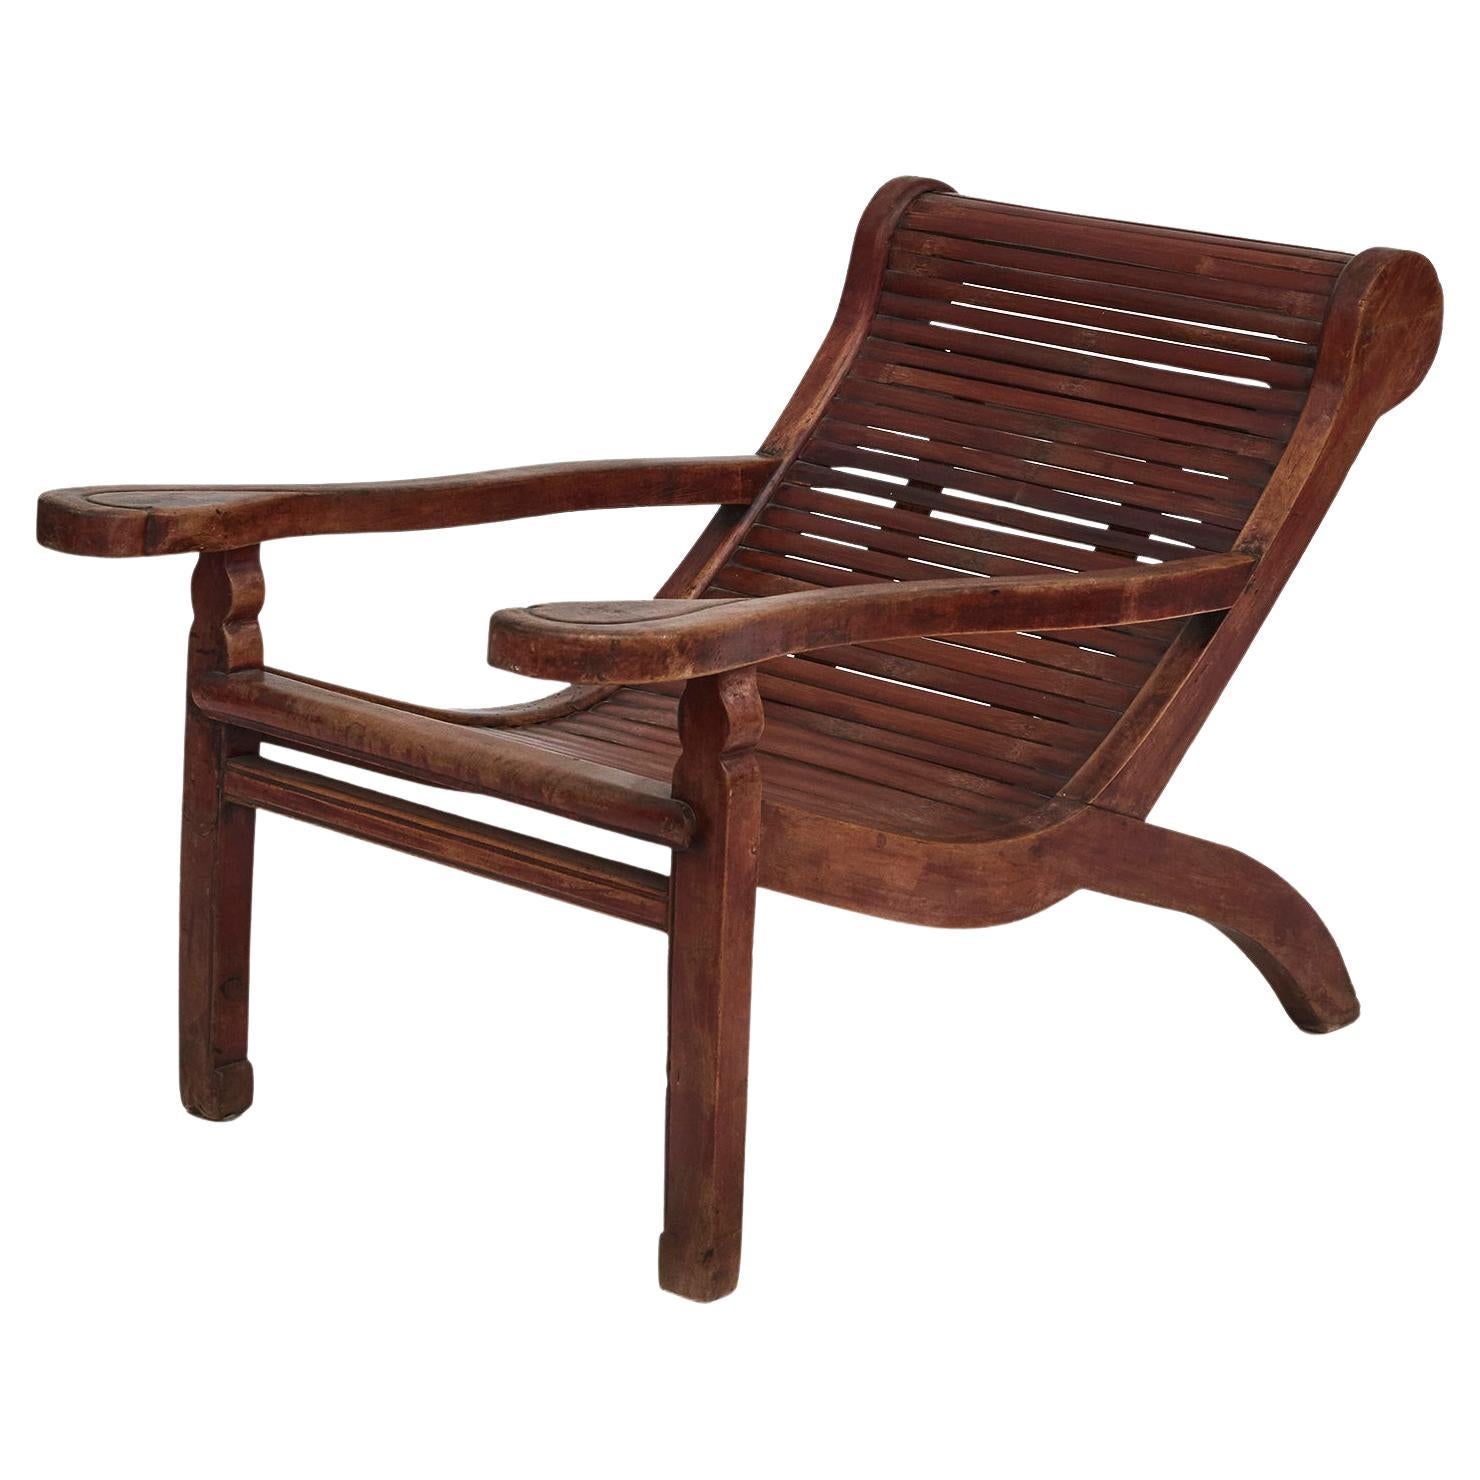 Plantation Lounge Chair In Bamboo And Wood